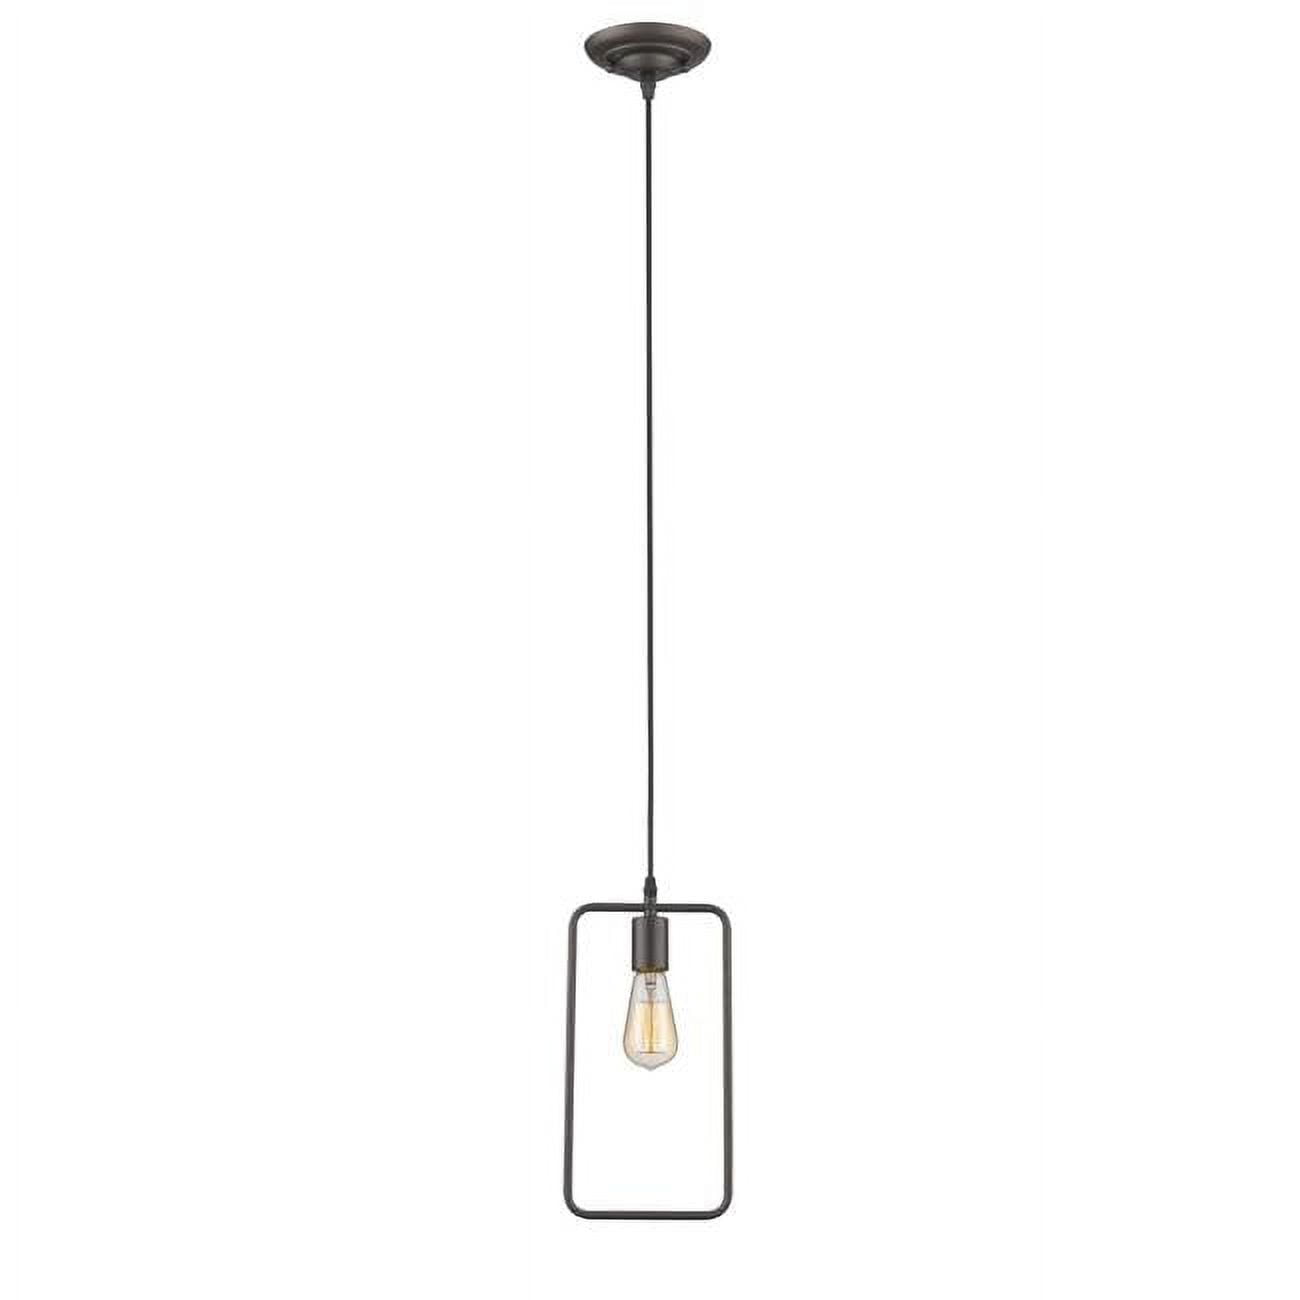 Ch2d098rb07-dp1 Ironclad Industrial-style 1 Light Rubbed Bronze Ceiling Mini Pendant - 7 In.